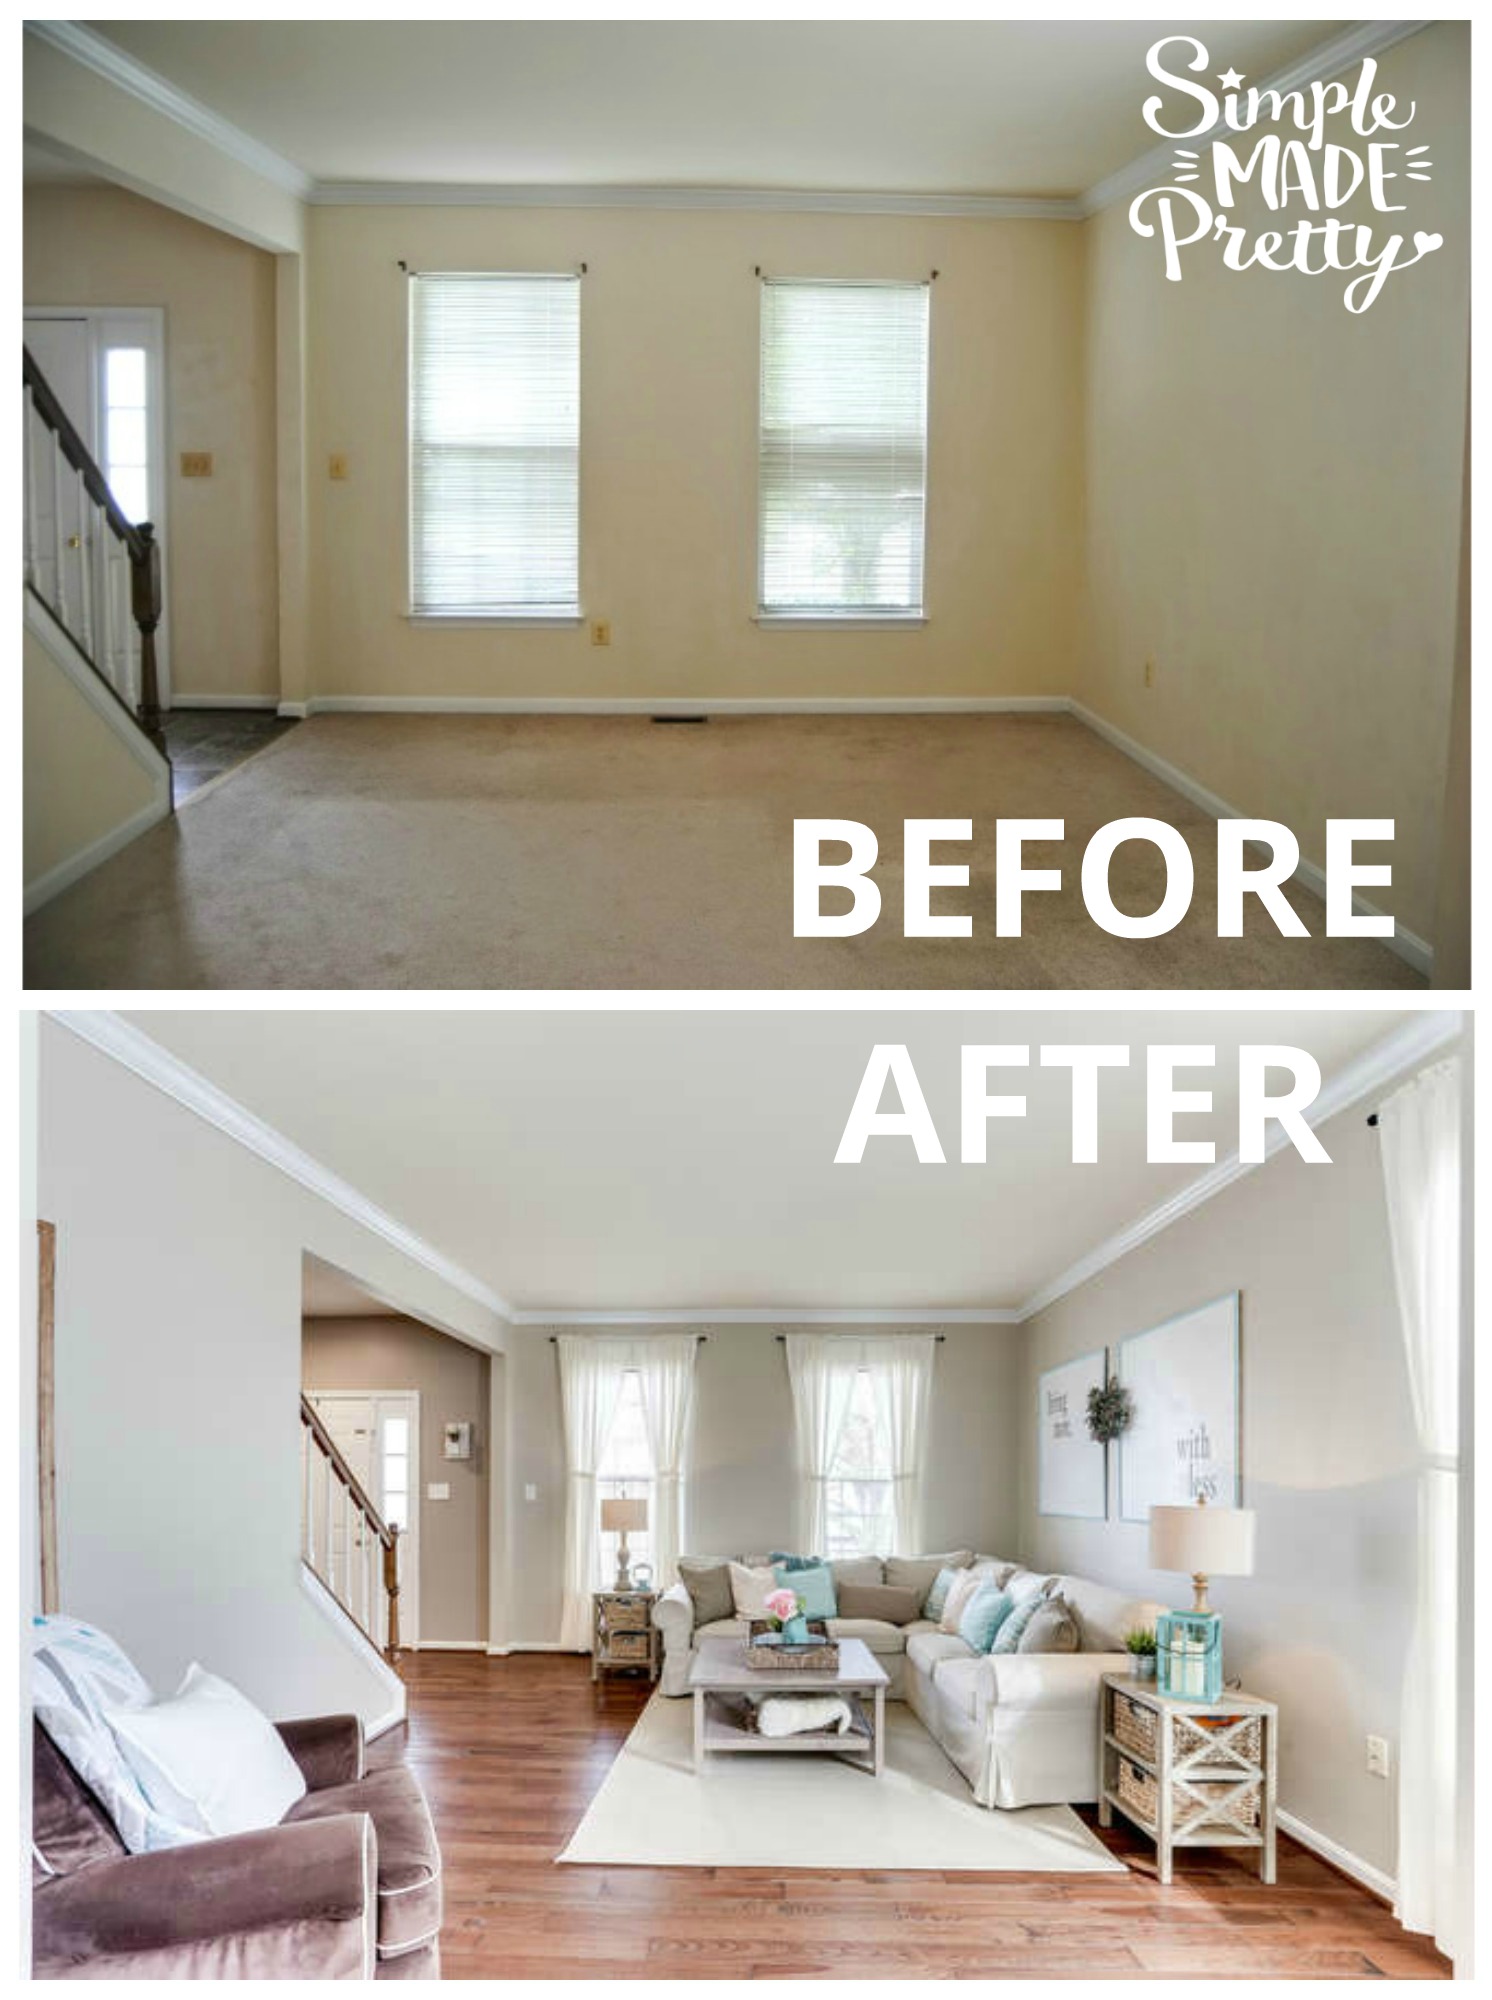 Living Room Before & After LOGO - Simple Made Pretty